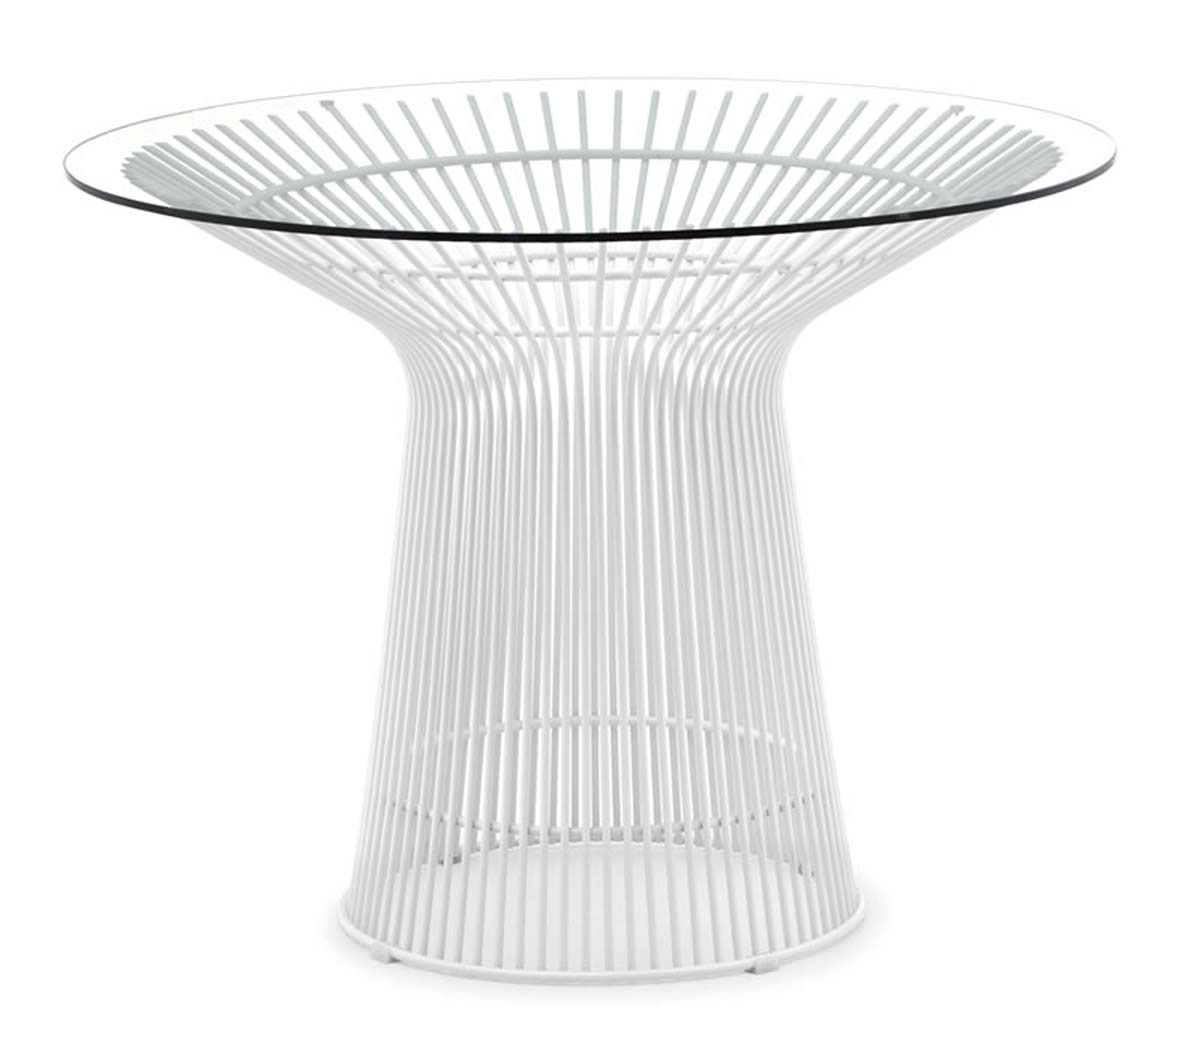 Zuo Modern Wetherby Dining Table - White